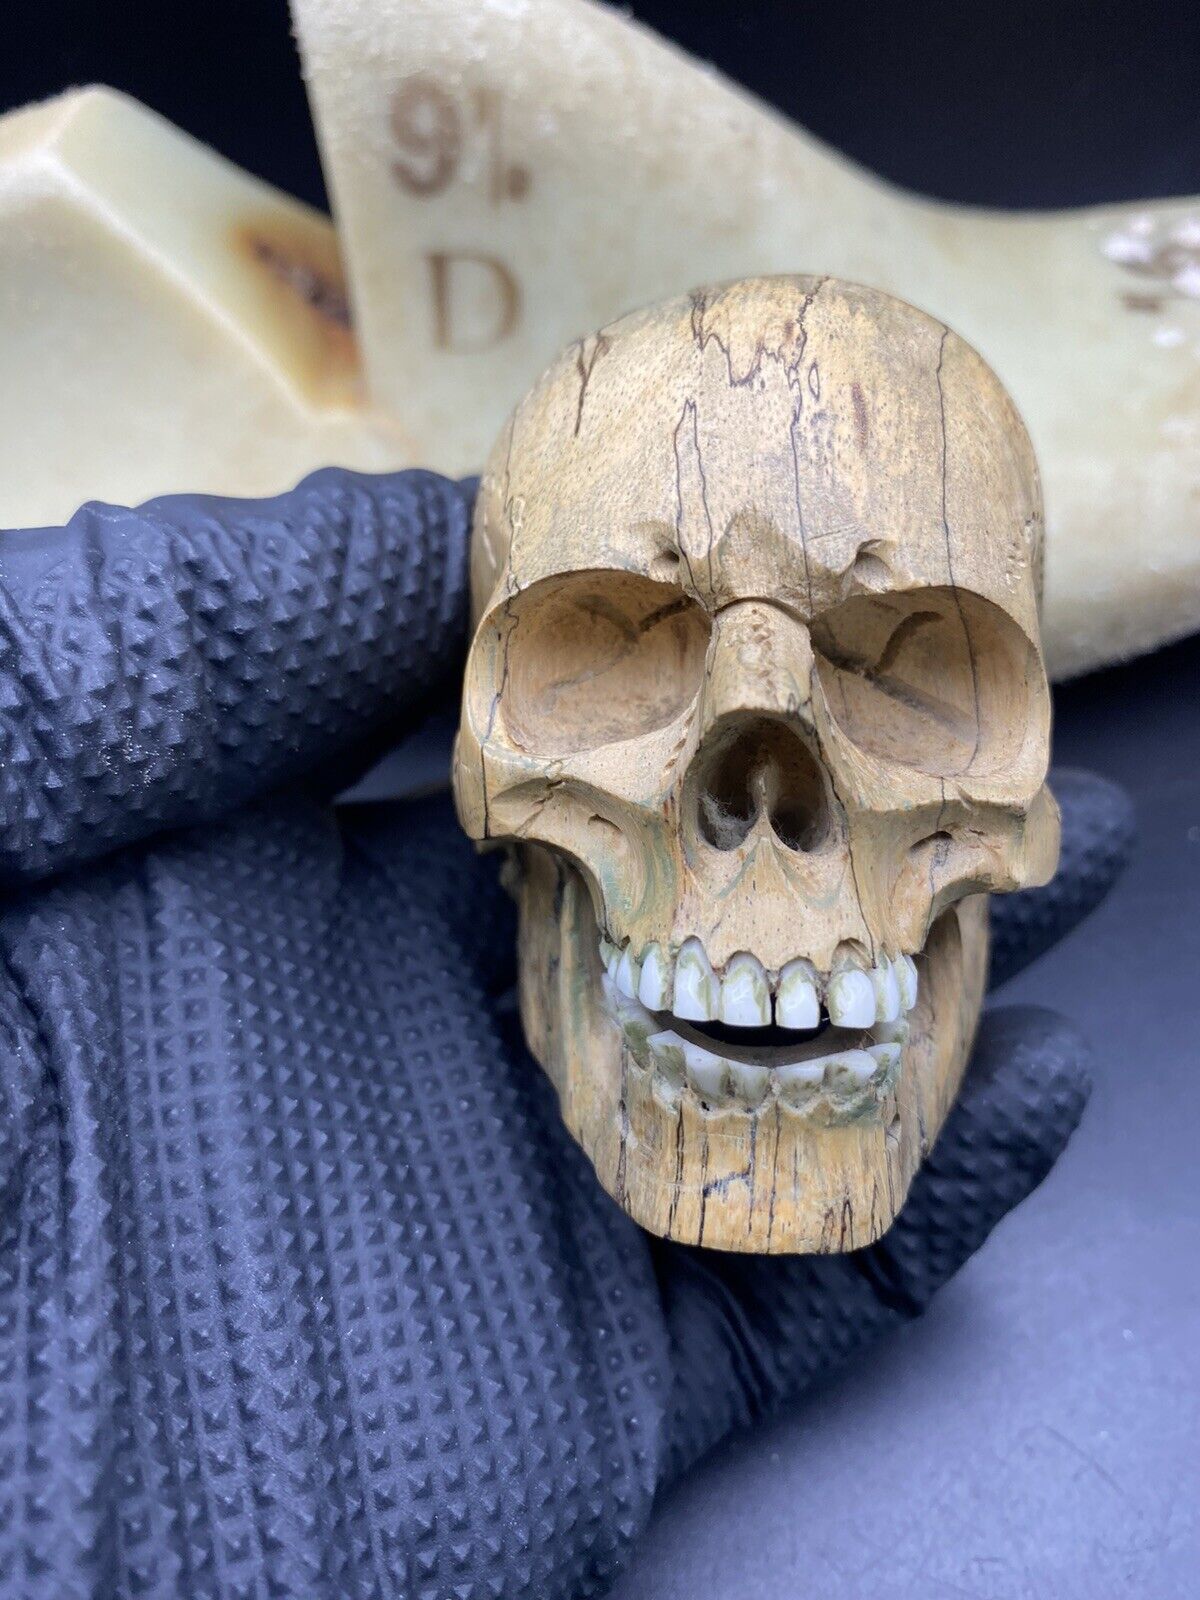 hand carved wooden skull 2.7 Inc High 2. Inc  Width